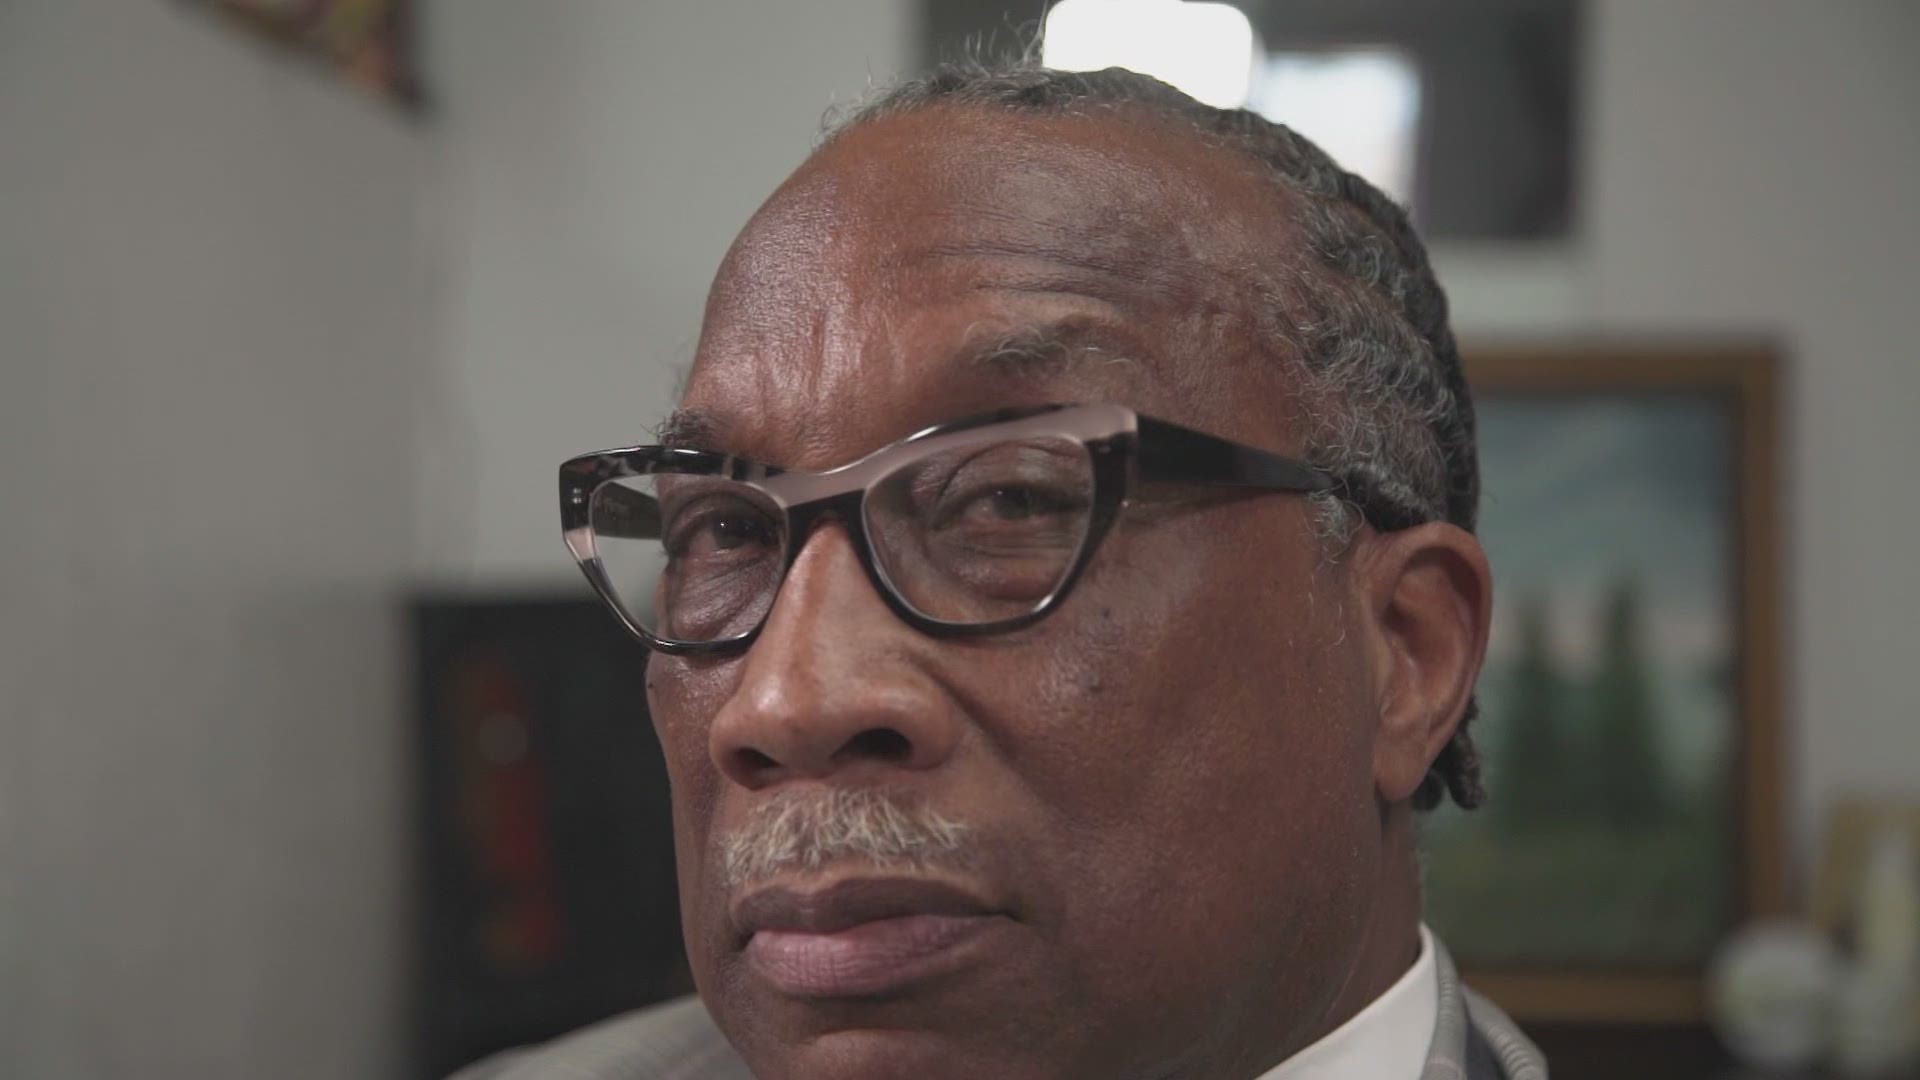 Dallas County Commissioner John Wiley Price sat down with Tashara Parker to share his hair story, talk about his public image, and how it's changed through the years